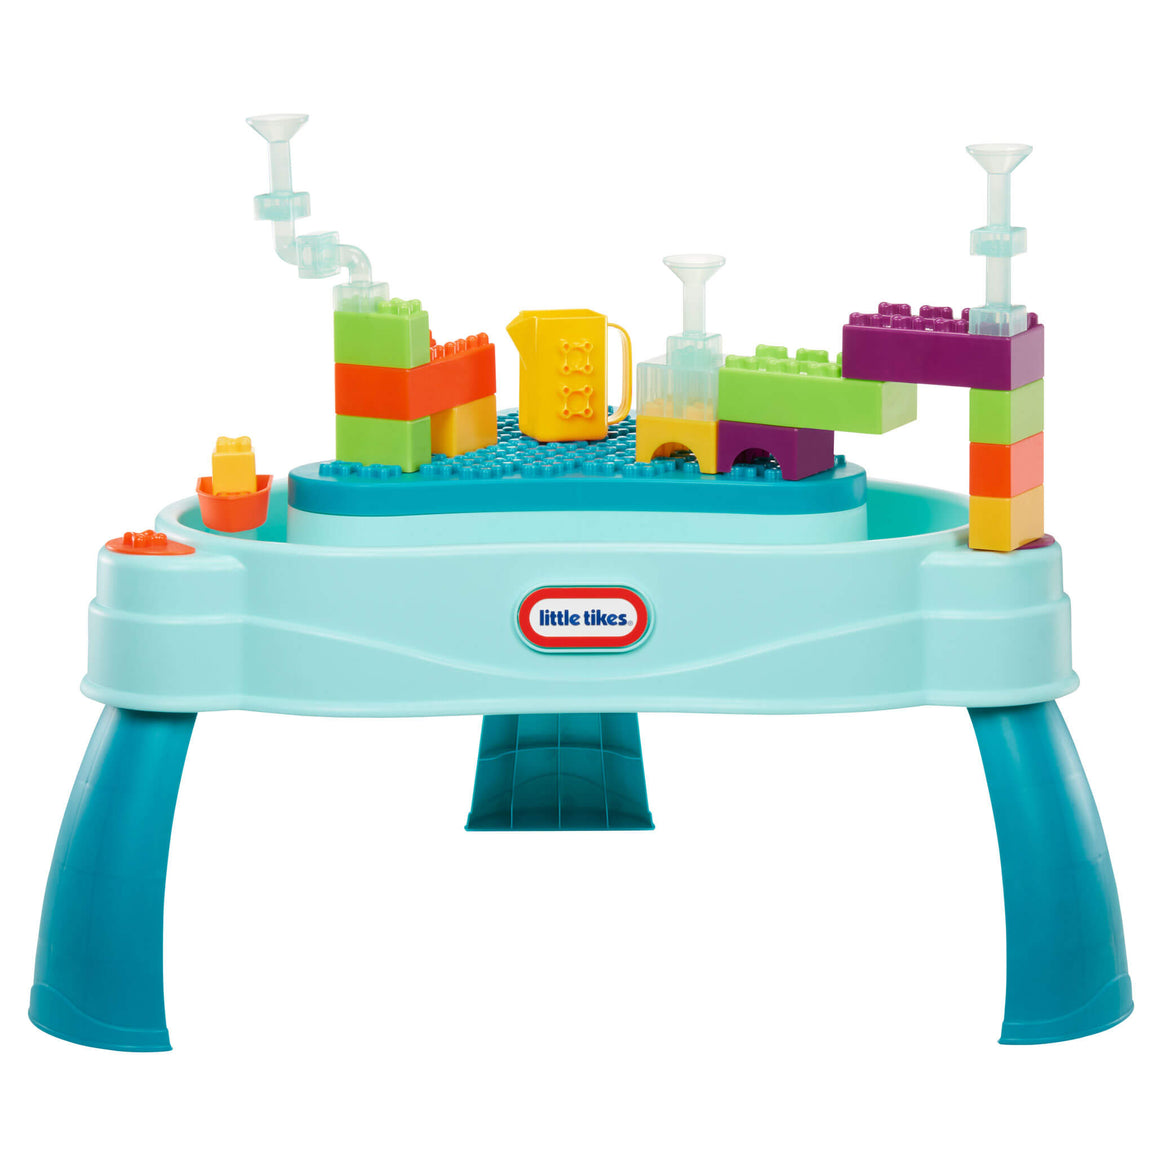 Build & Splash™ Water Table with 50+ Accessories - Official Little Tikes Website